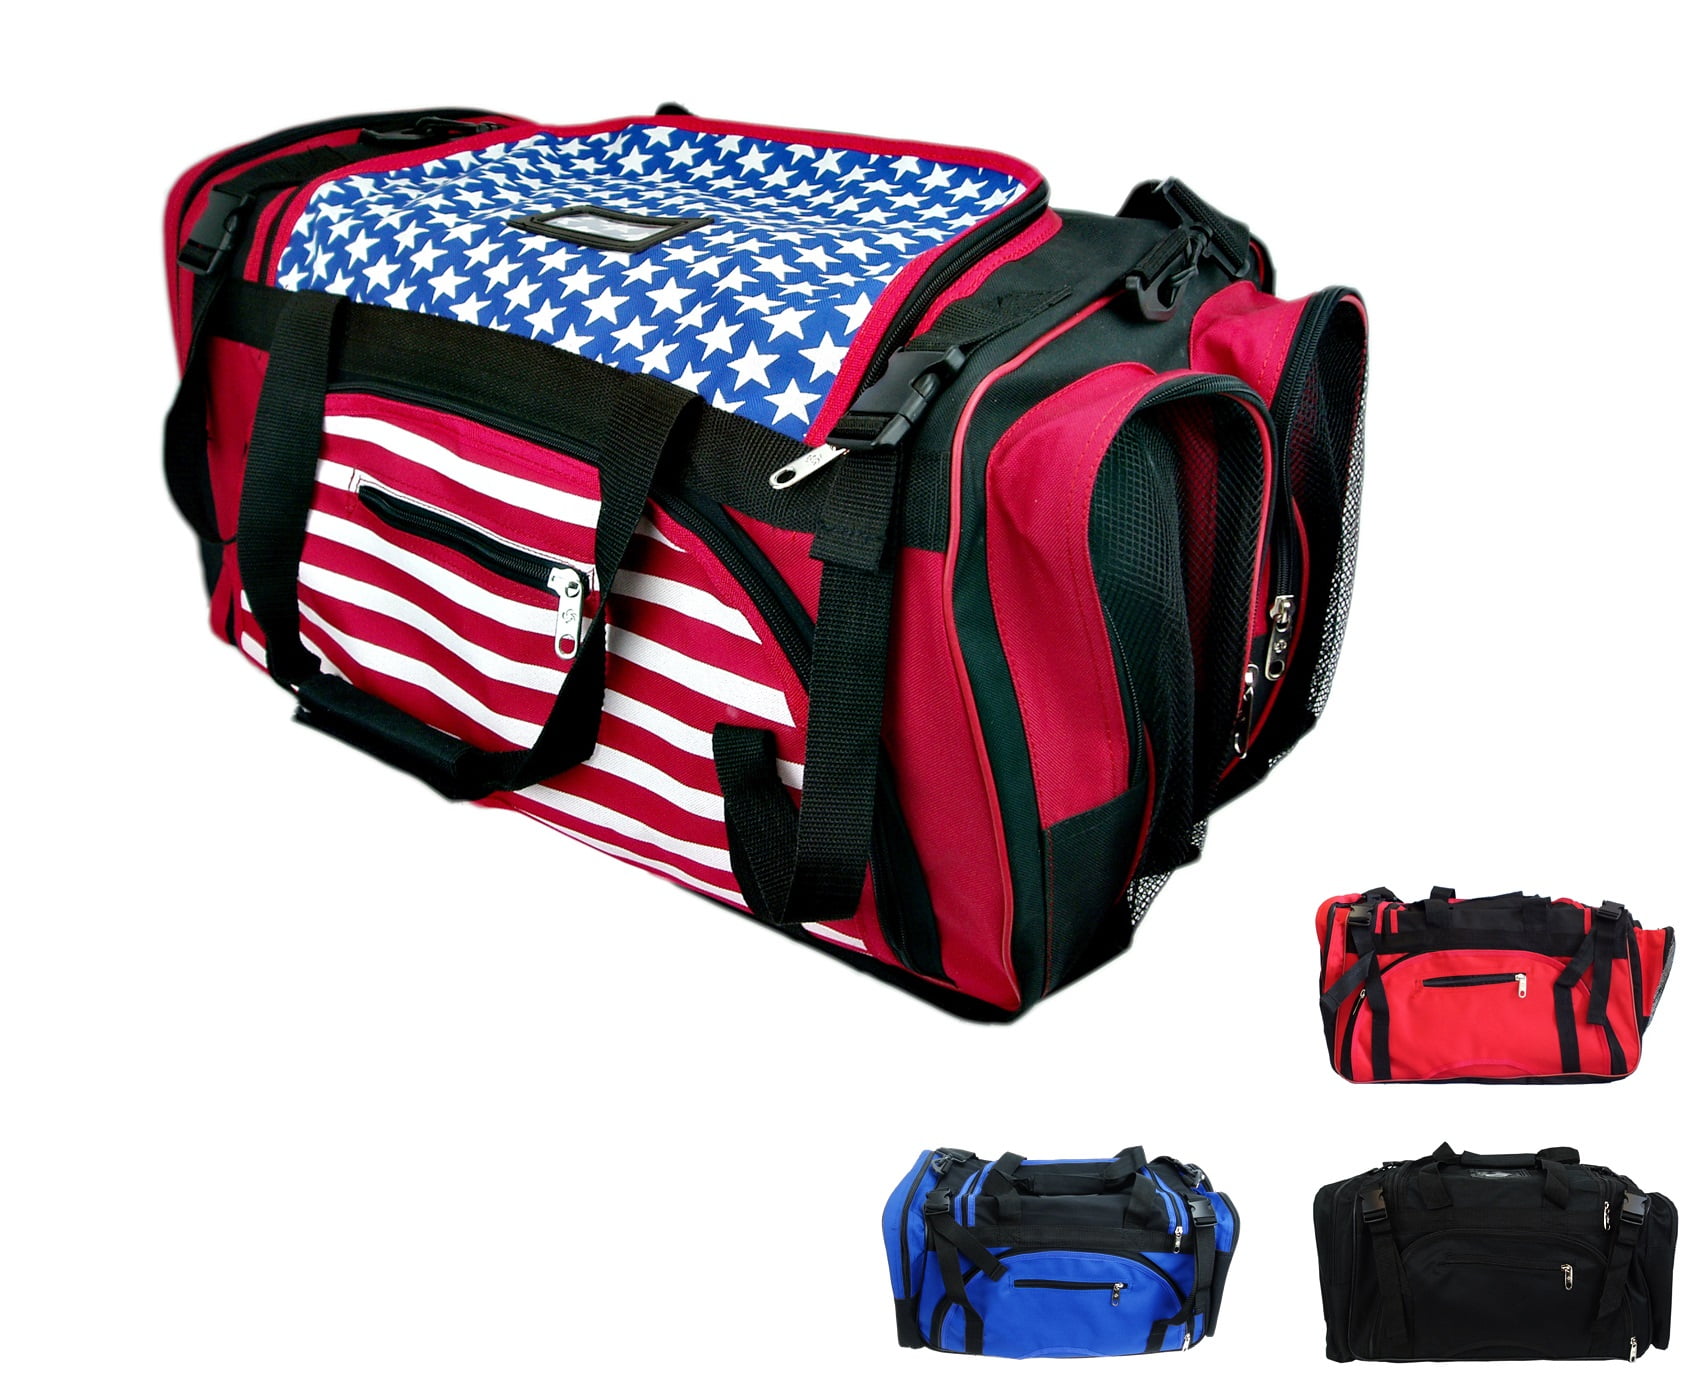 GYM Sports kit bag Holdall Duffle hand carry Training MMA Boxing Weightlifting. 